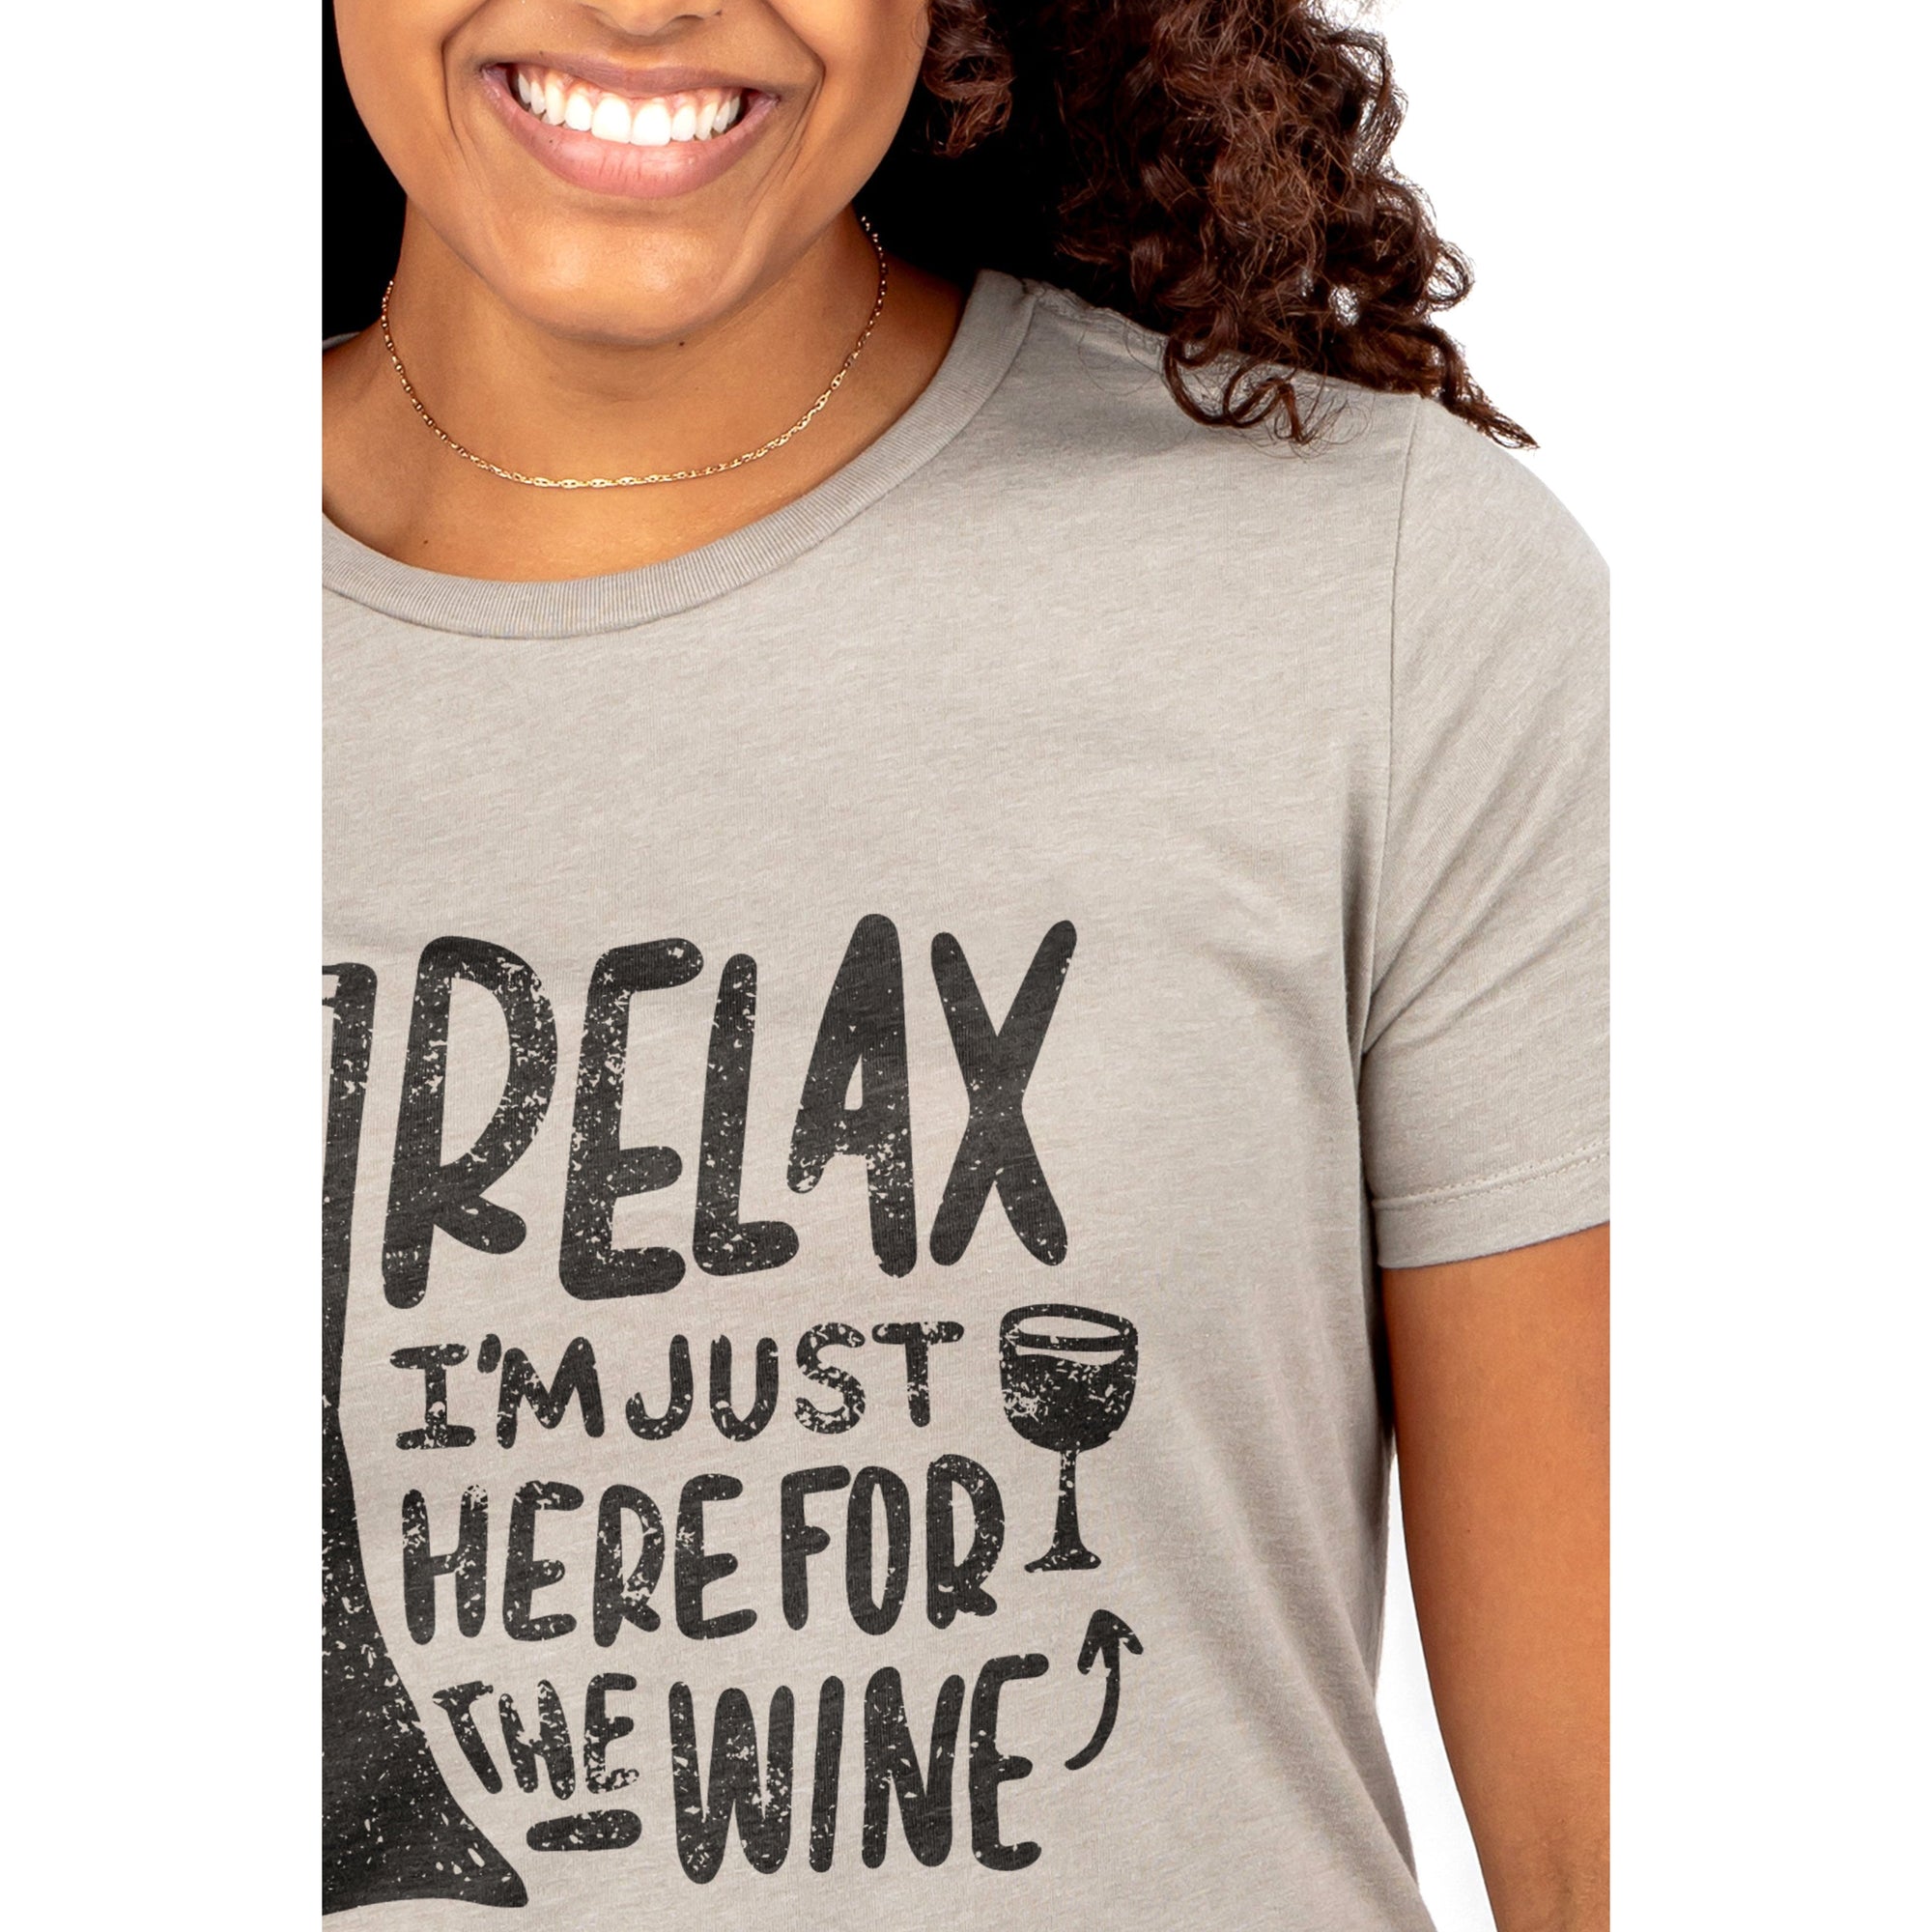 Relax I'm Just Here For The Wine - thread tank | Stories you can wear.